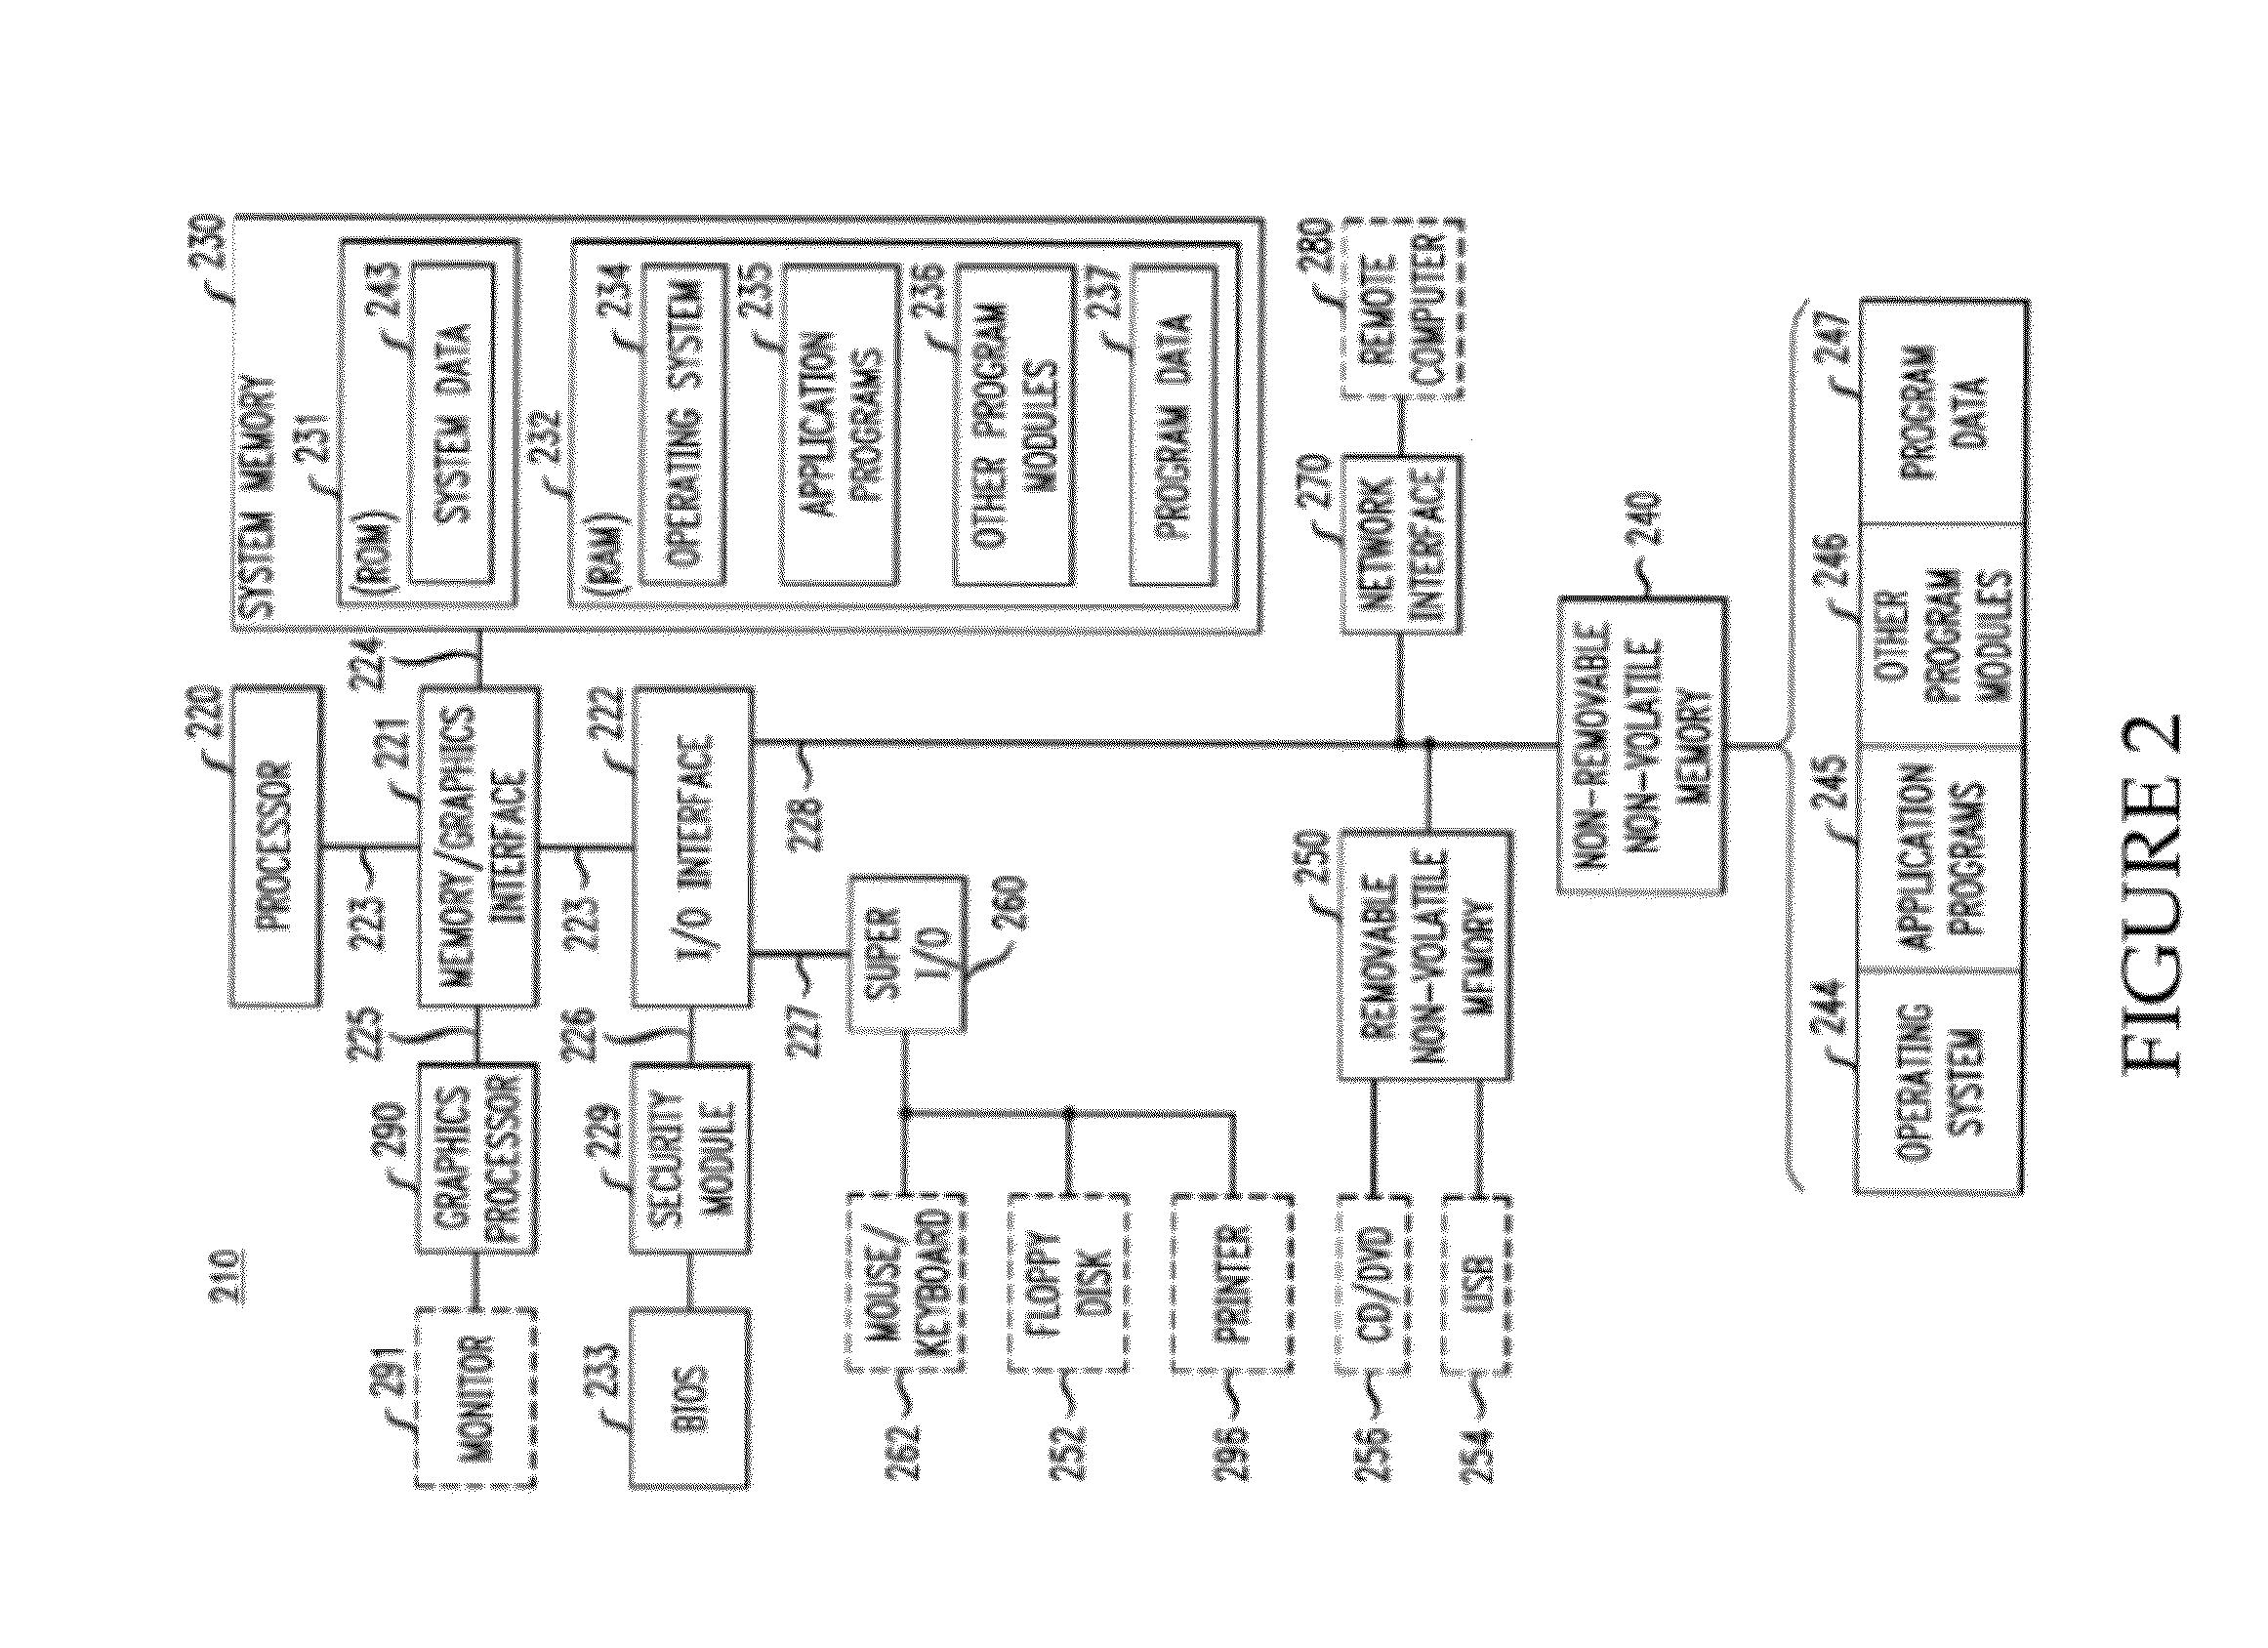 System and method for increasing medication adherence rates